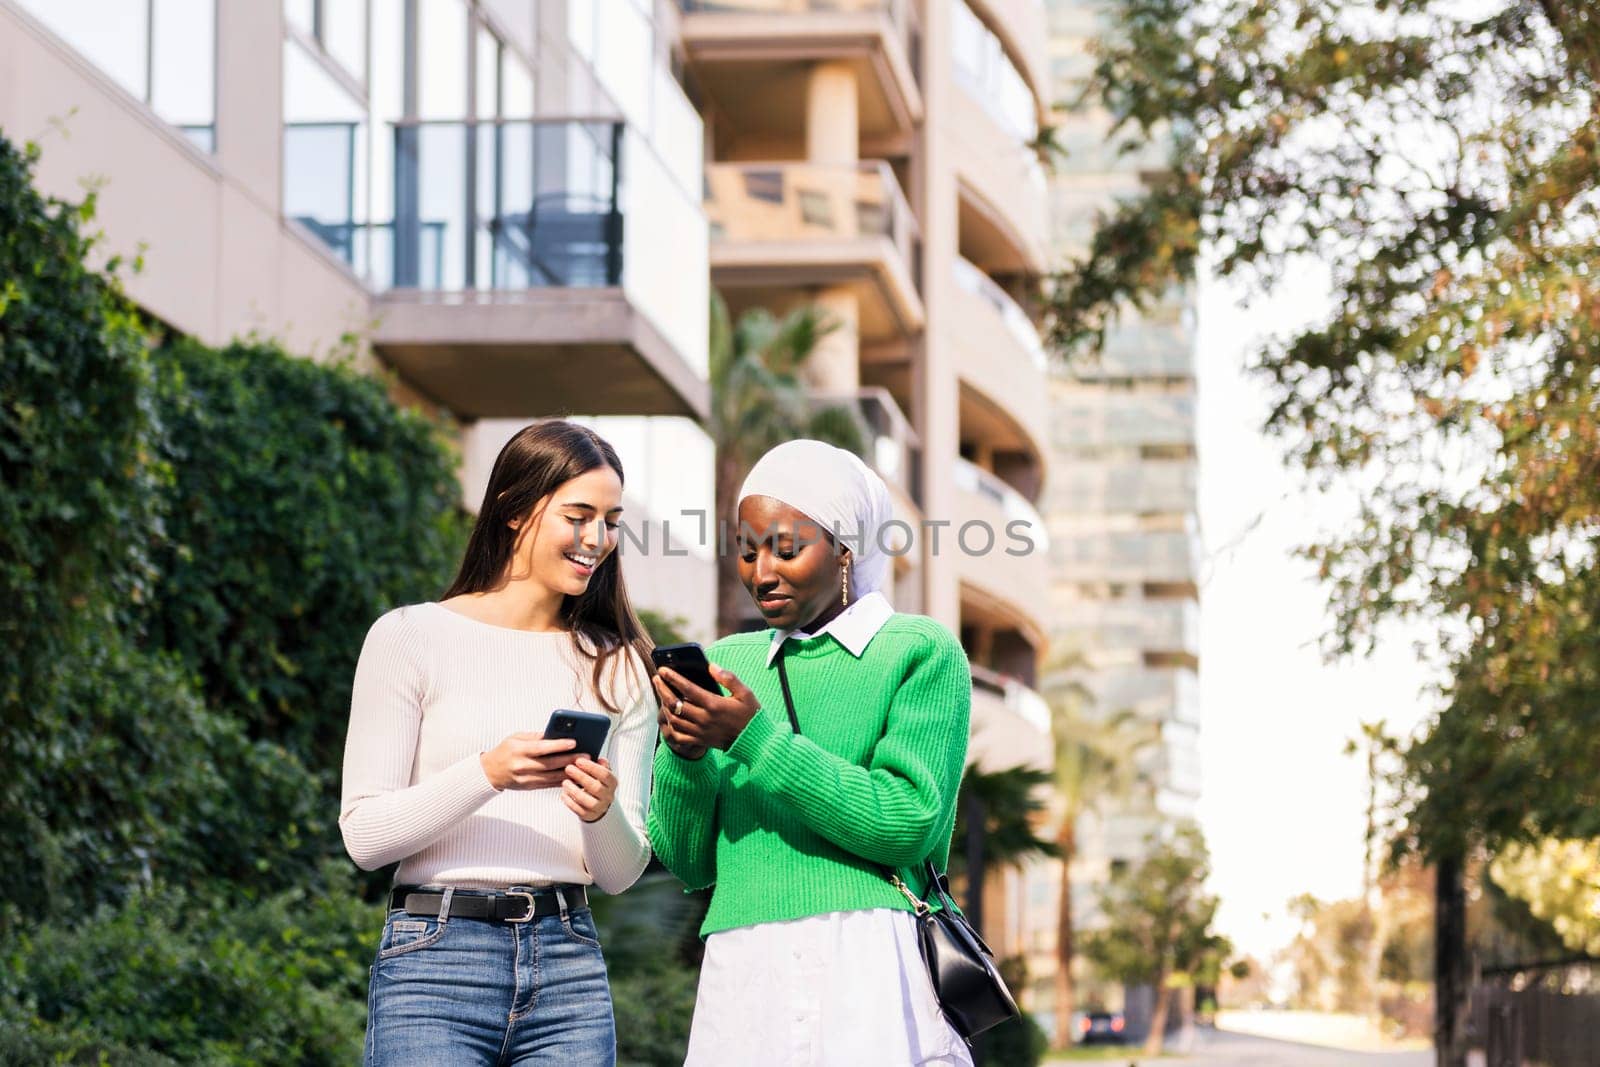 two young women walking down a street looking their cell phones, concept of friendship and technology, copy space for text